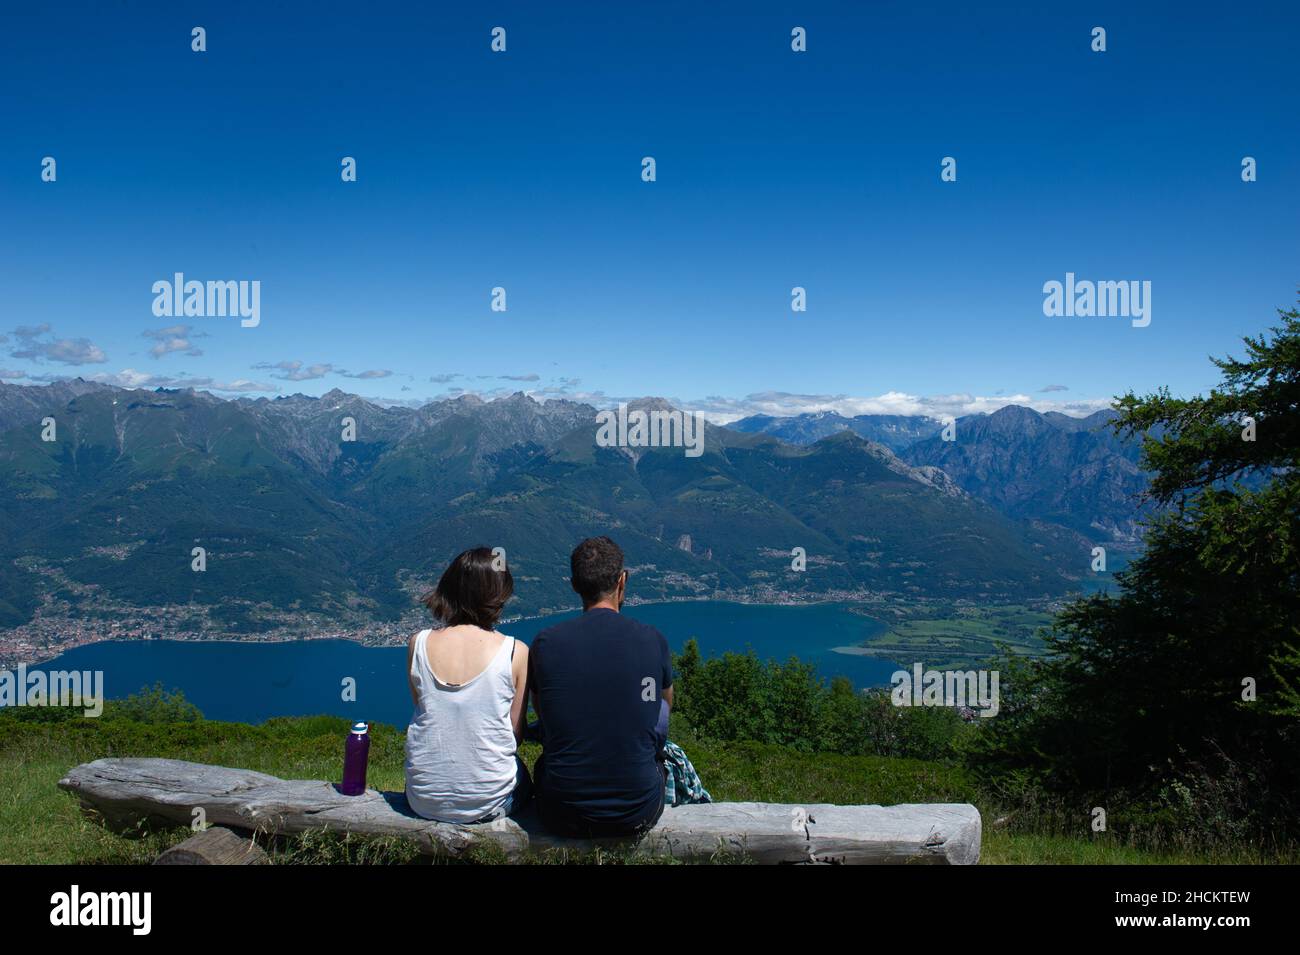 Europe, Italy, Lombardy, Lecco province, Wooden bench on the top of Mount Legnoncino overlooking Lake Como. Stock Photo